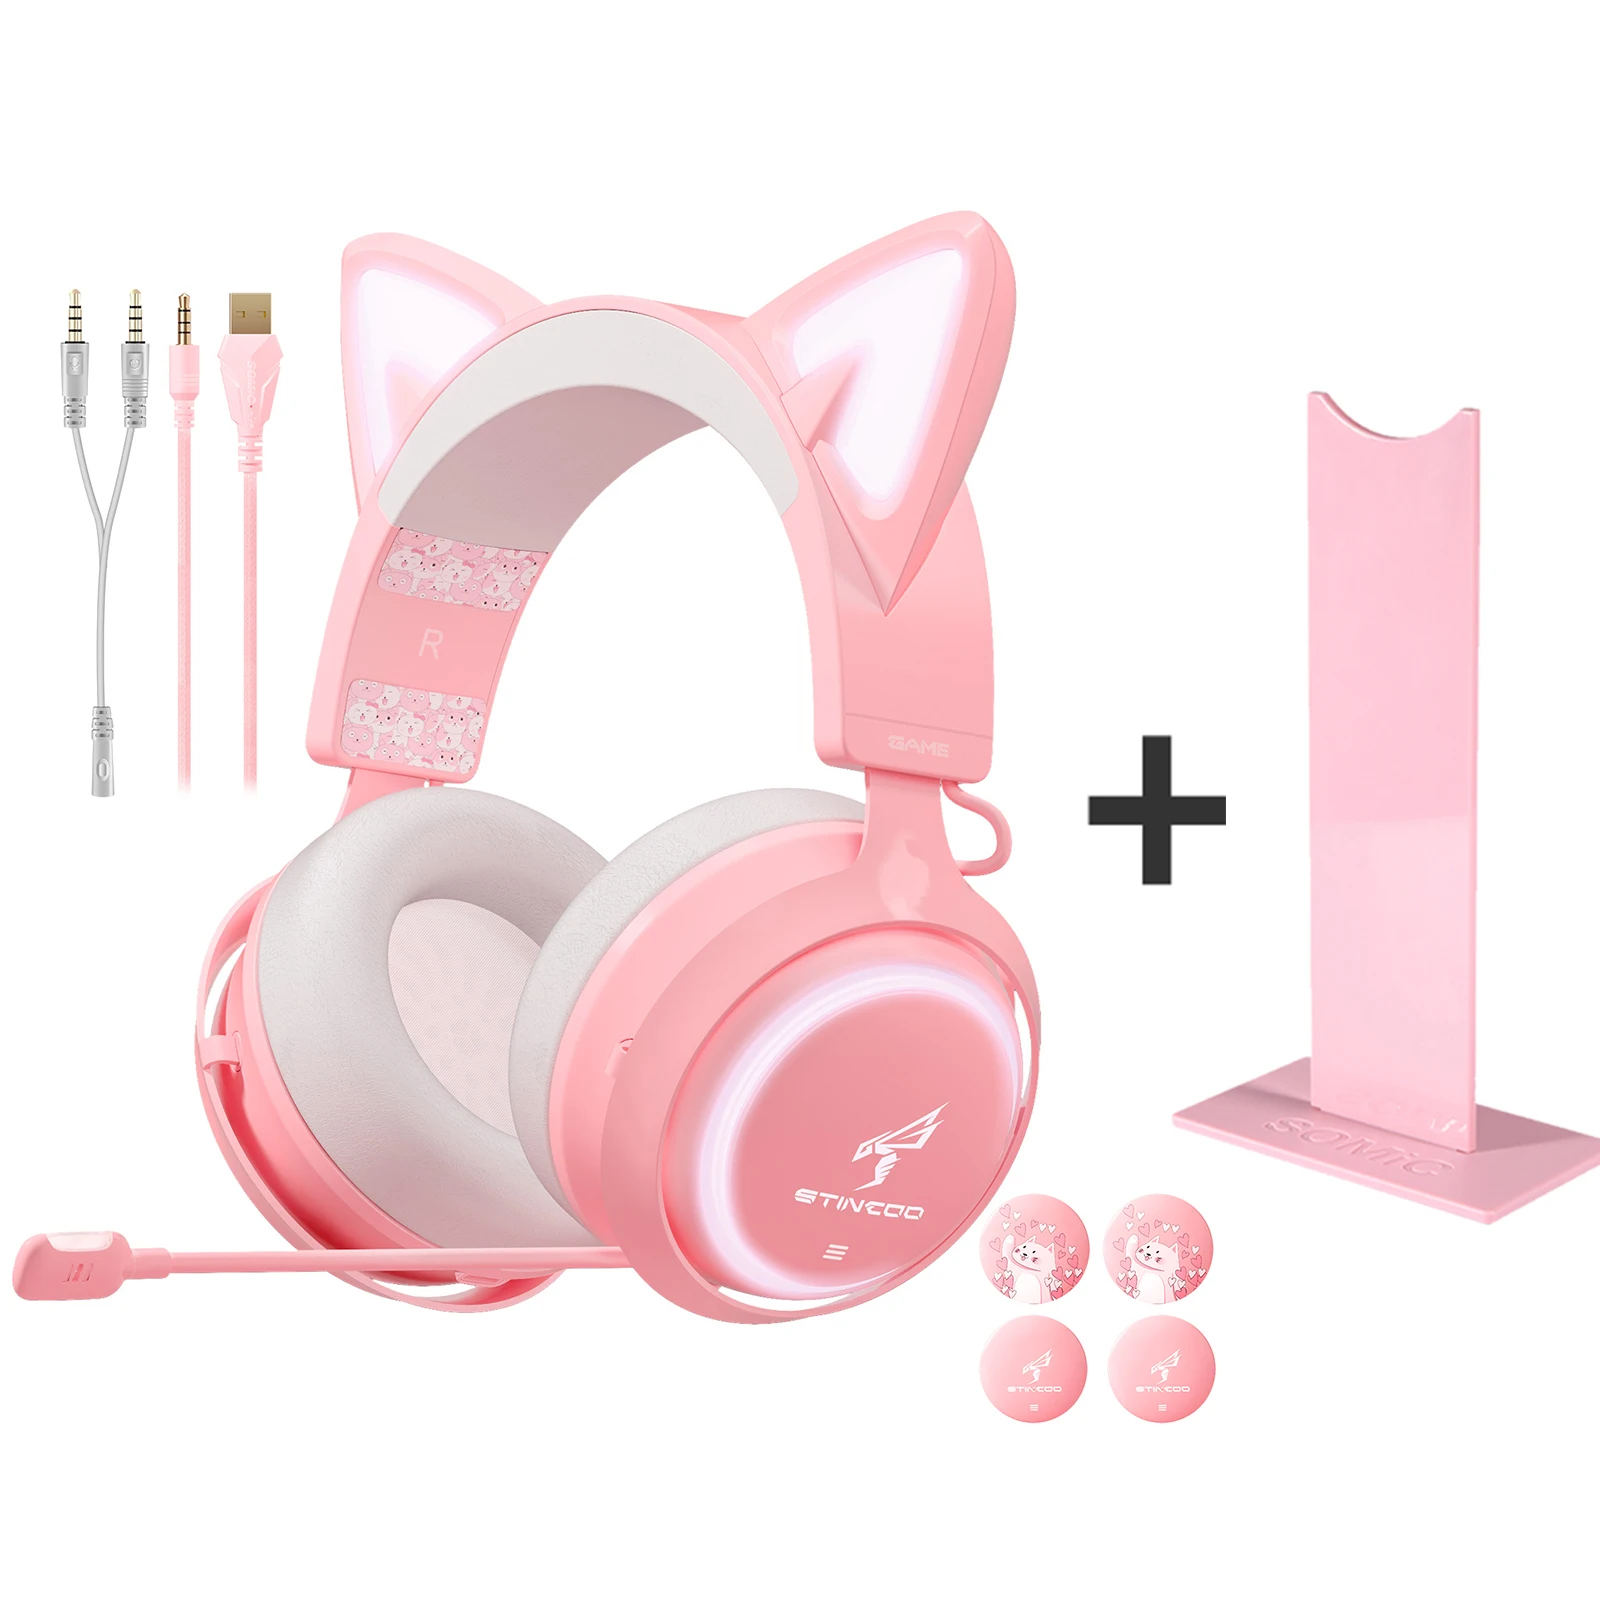 

SOMIC GS510 3.5MM Gaming Wired Headset Helmets with Cable Micphone Earphone Pink Headphone for PS5/PS4/PC/Phone Cellular Gamer